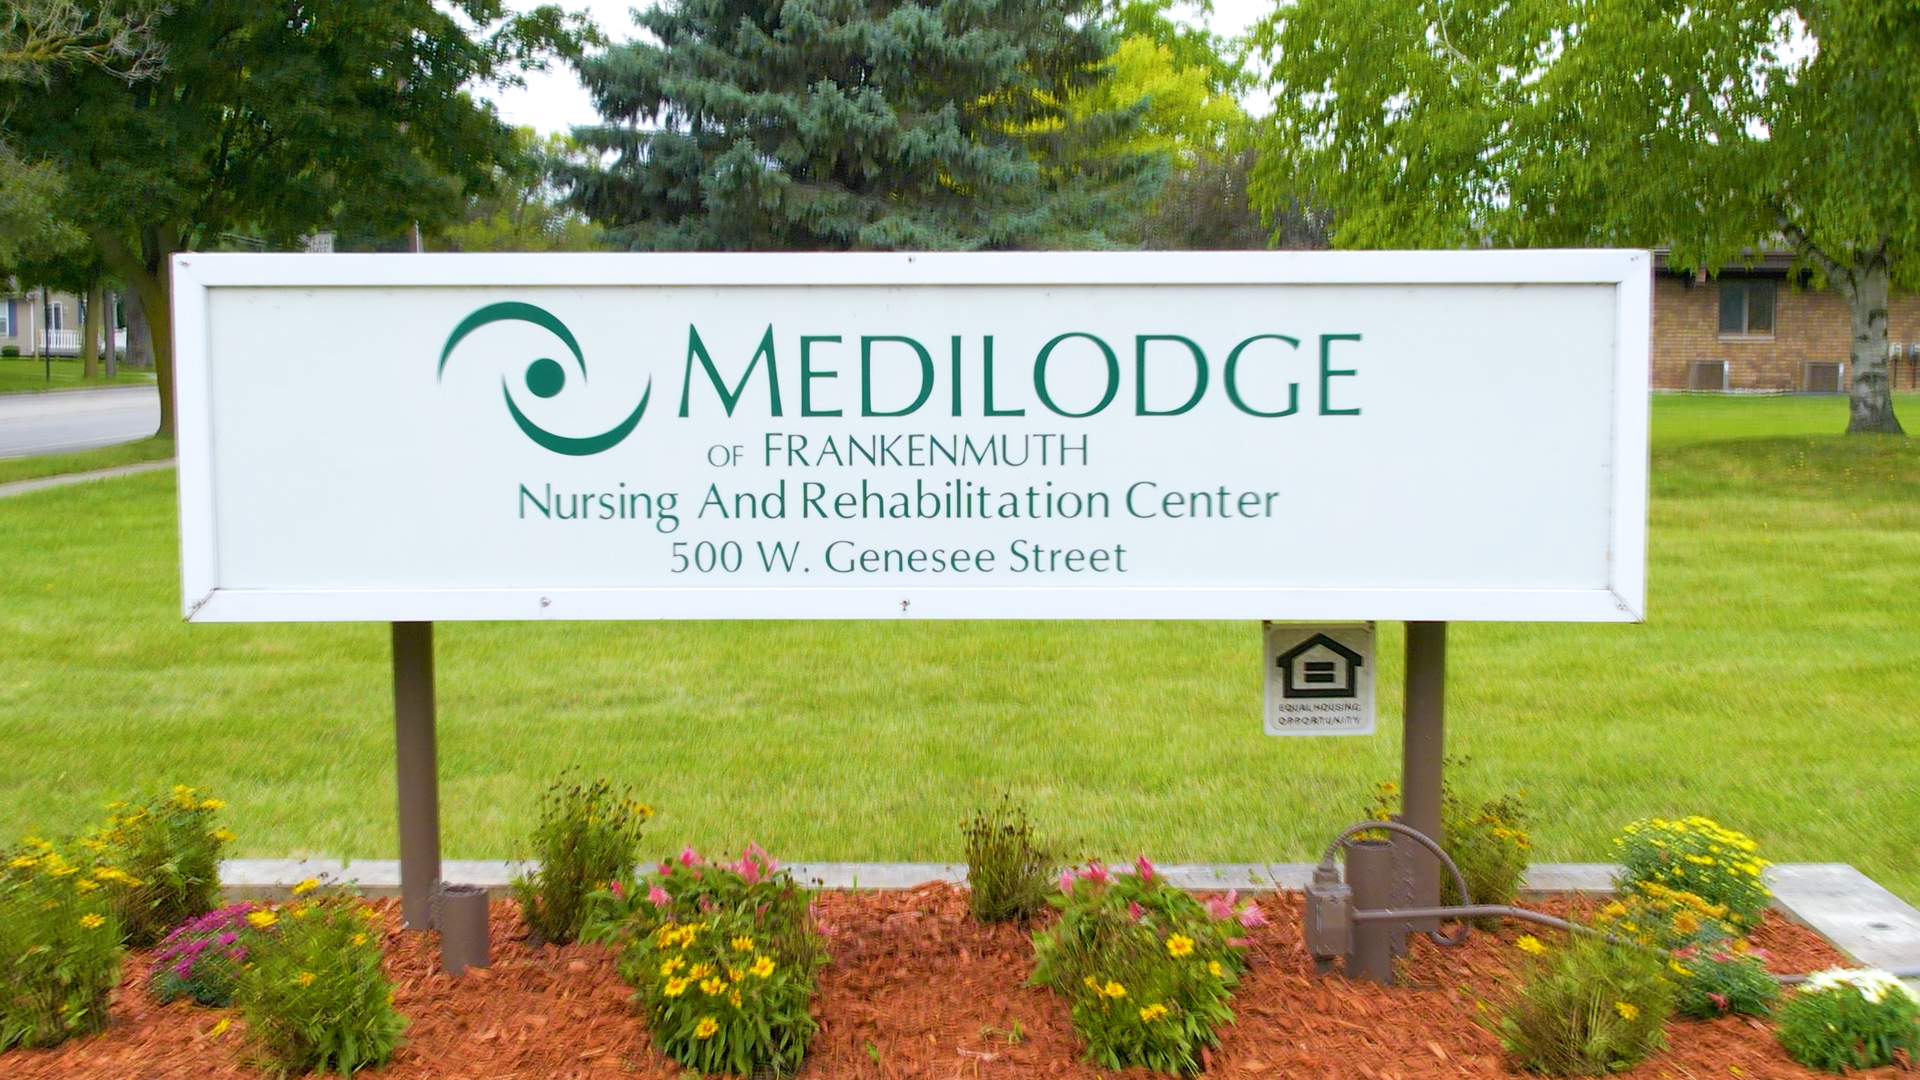 Medilodge of Frankenmuth sign board with plants and trees on the background.